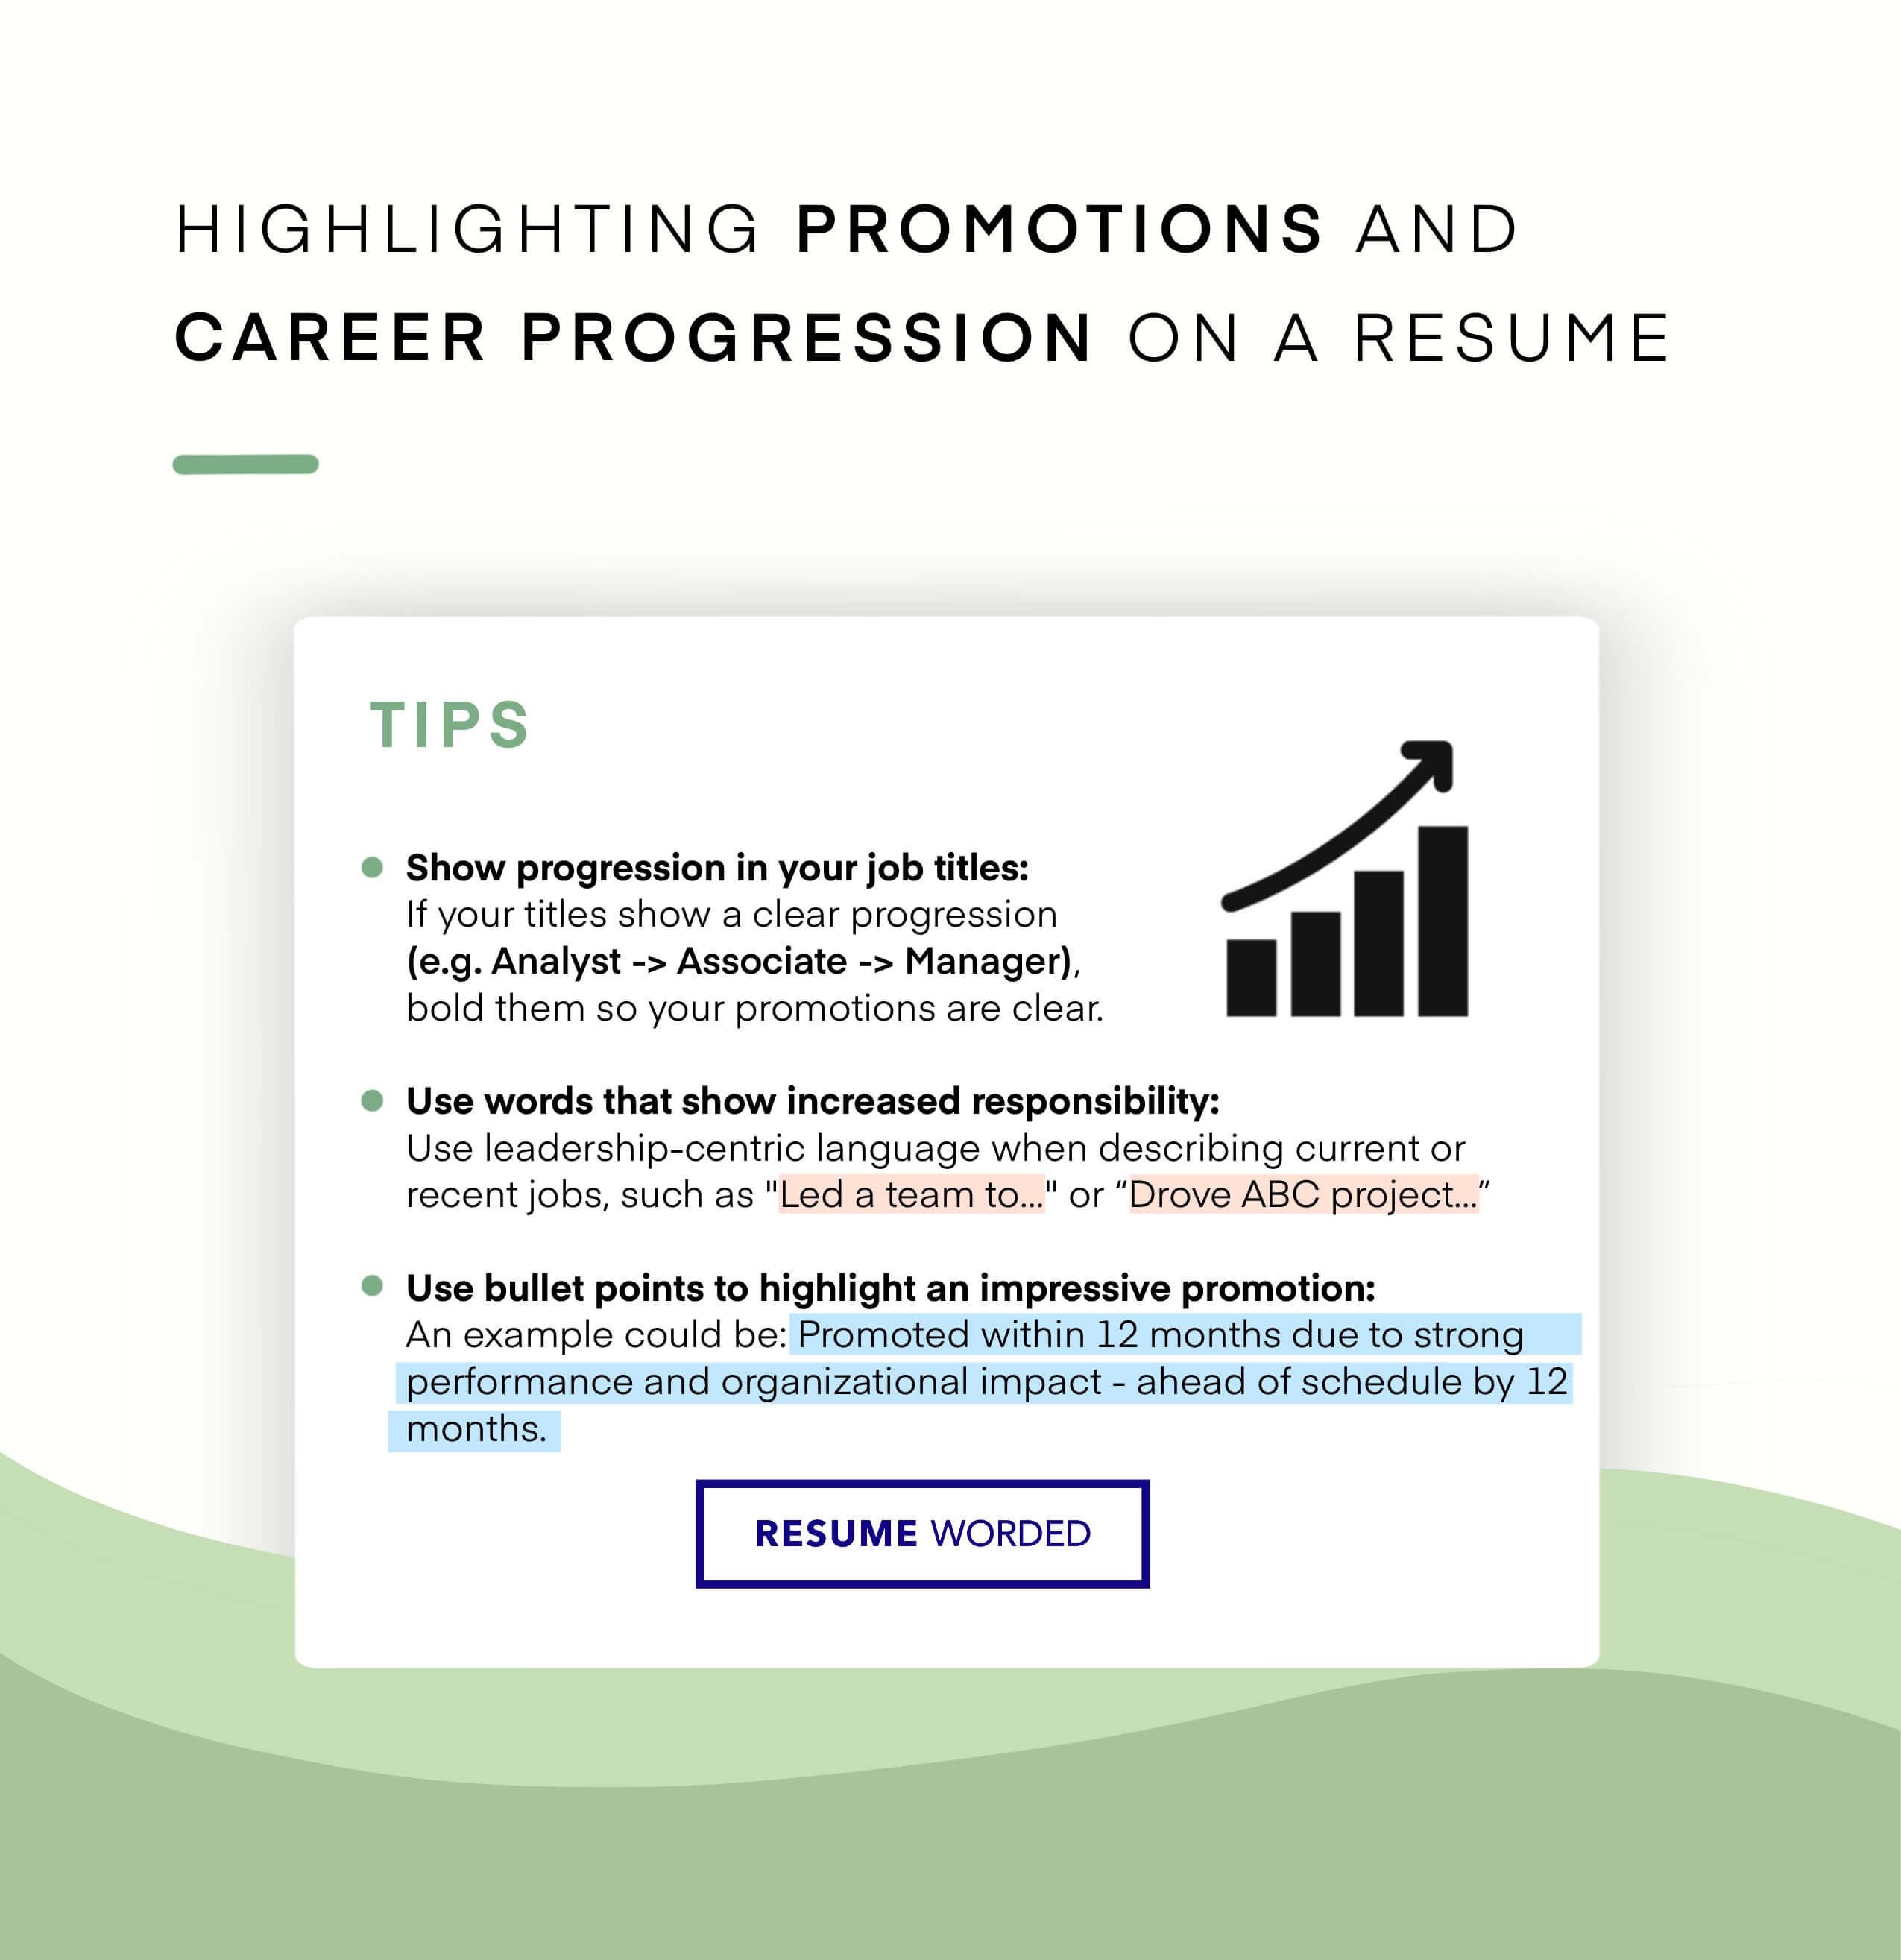 Show career progression through promotions. - Fixed Asset Accountant Resume